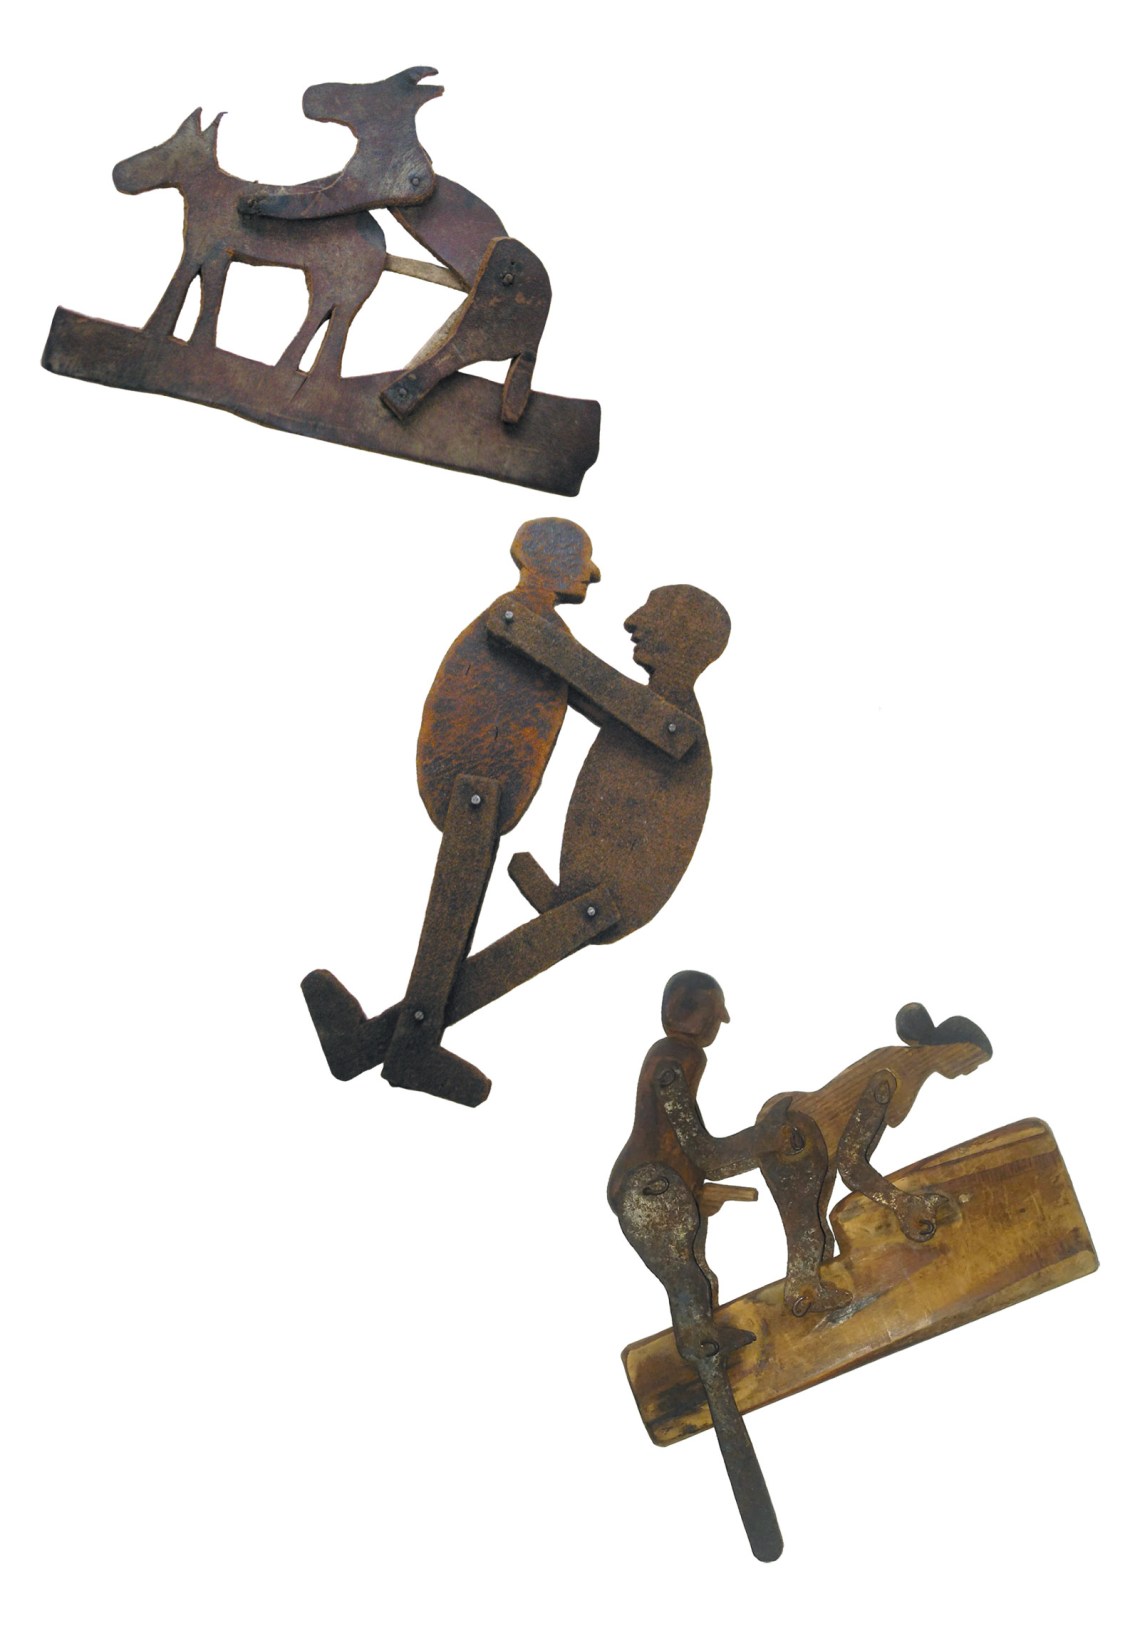 Articulated figures made from leather, metal and wood, circa 1920–1930